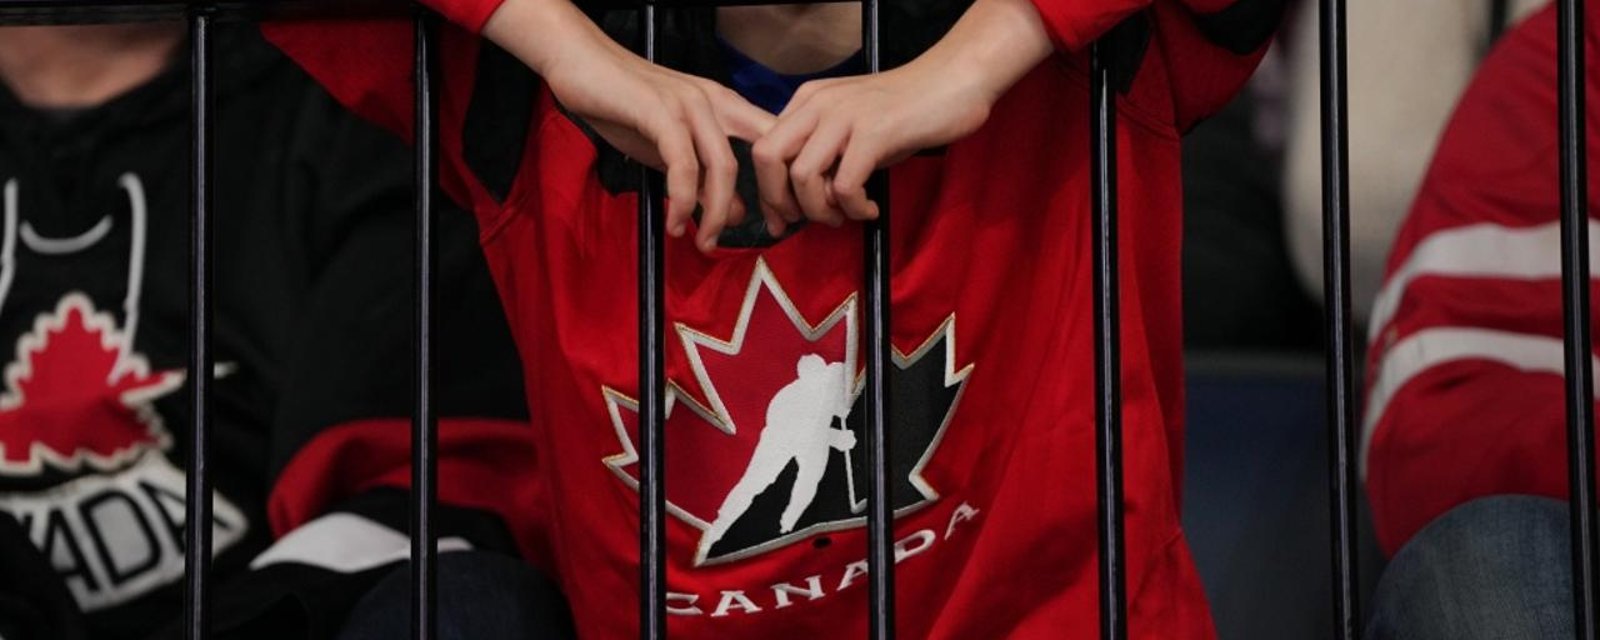 Two more players granted indefinite leave of absences amidst WJC investigation